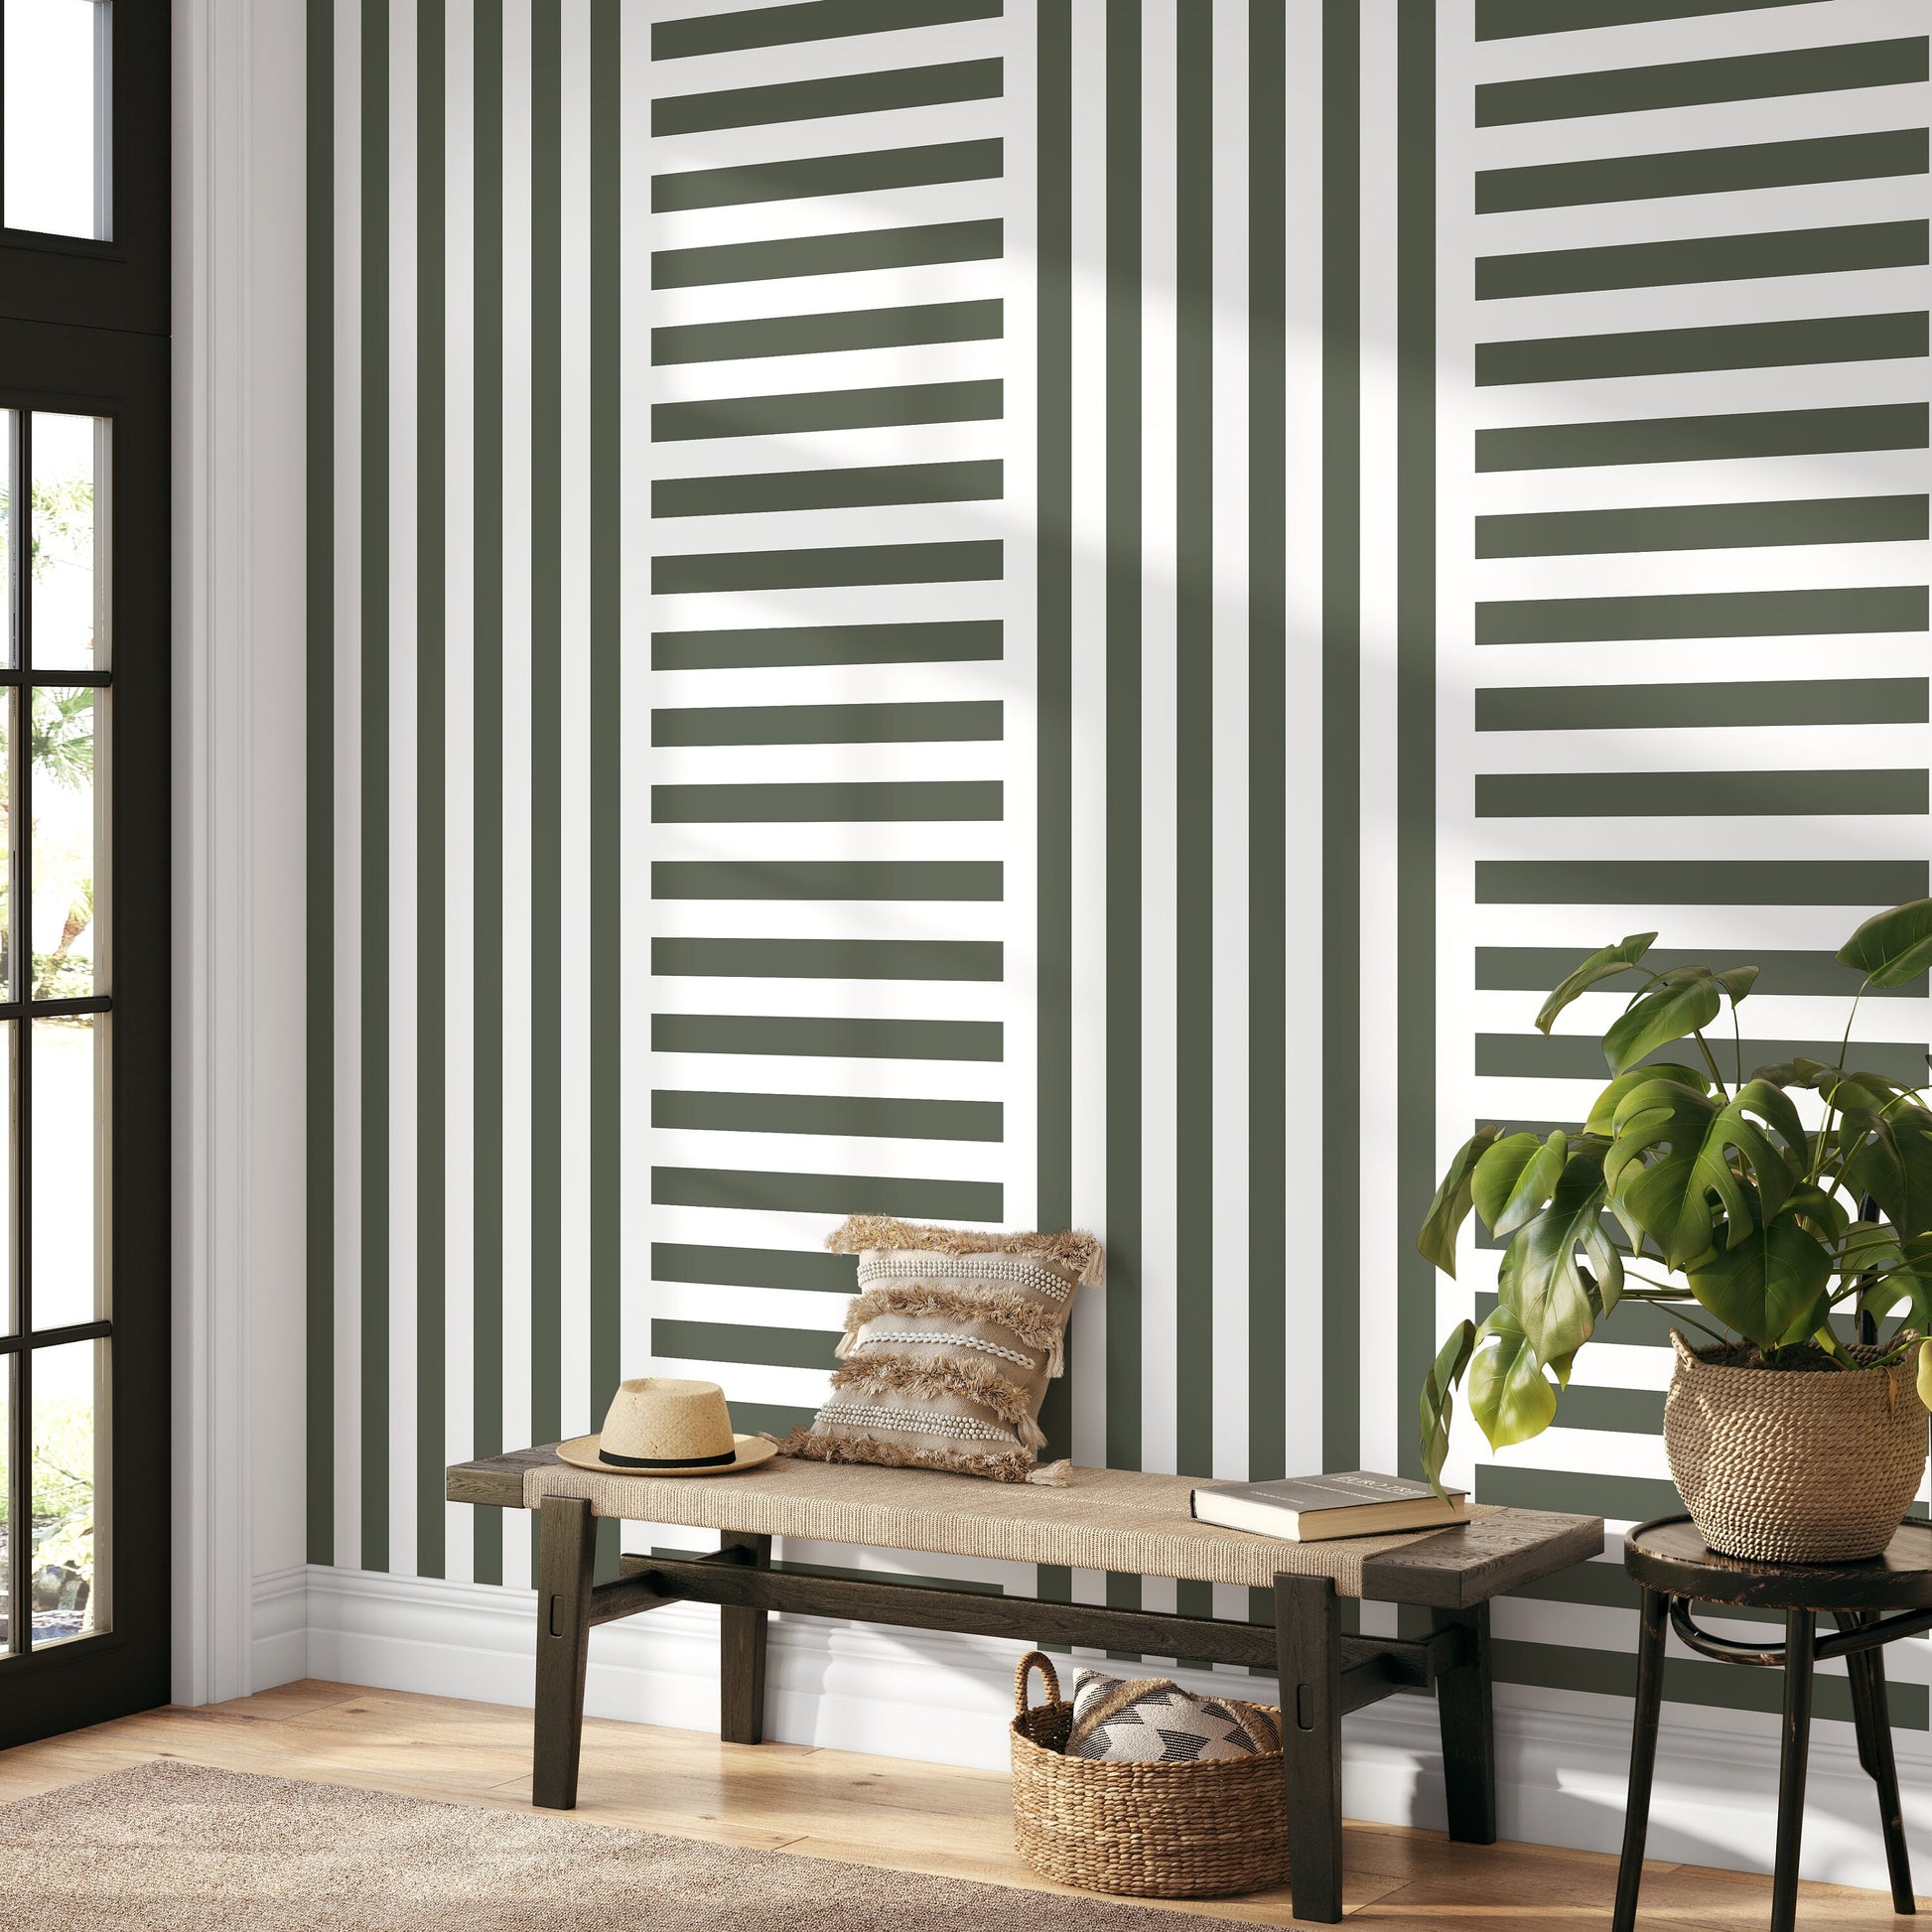 Olive Green Striped Wallpaper Modern Geometric Wallpaper Peel and Stick and Traditional Wallpaper - D735